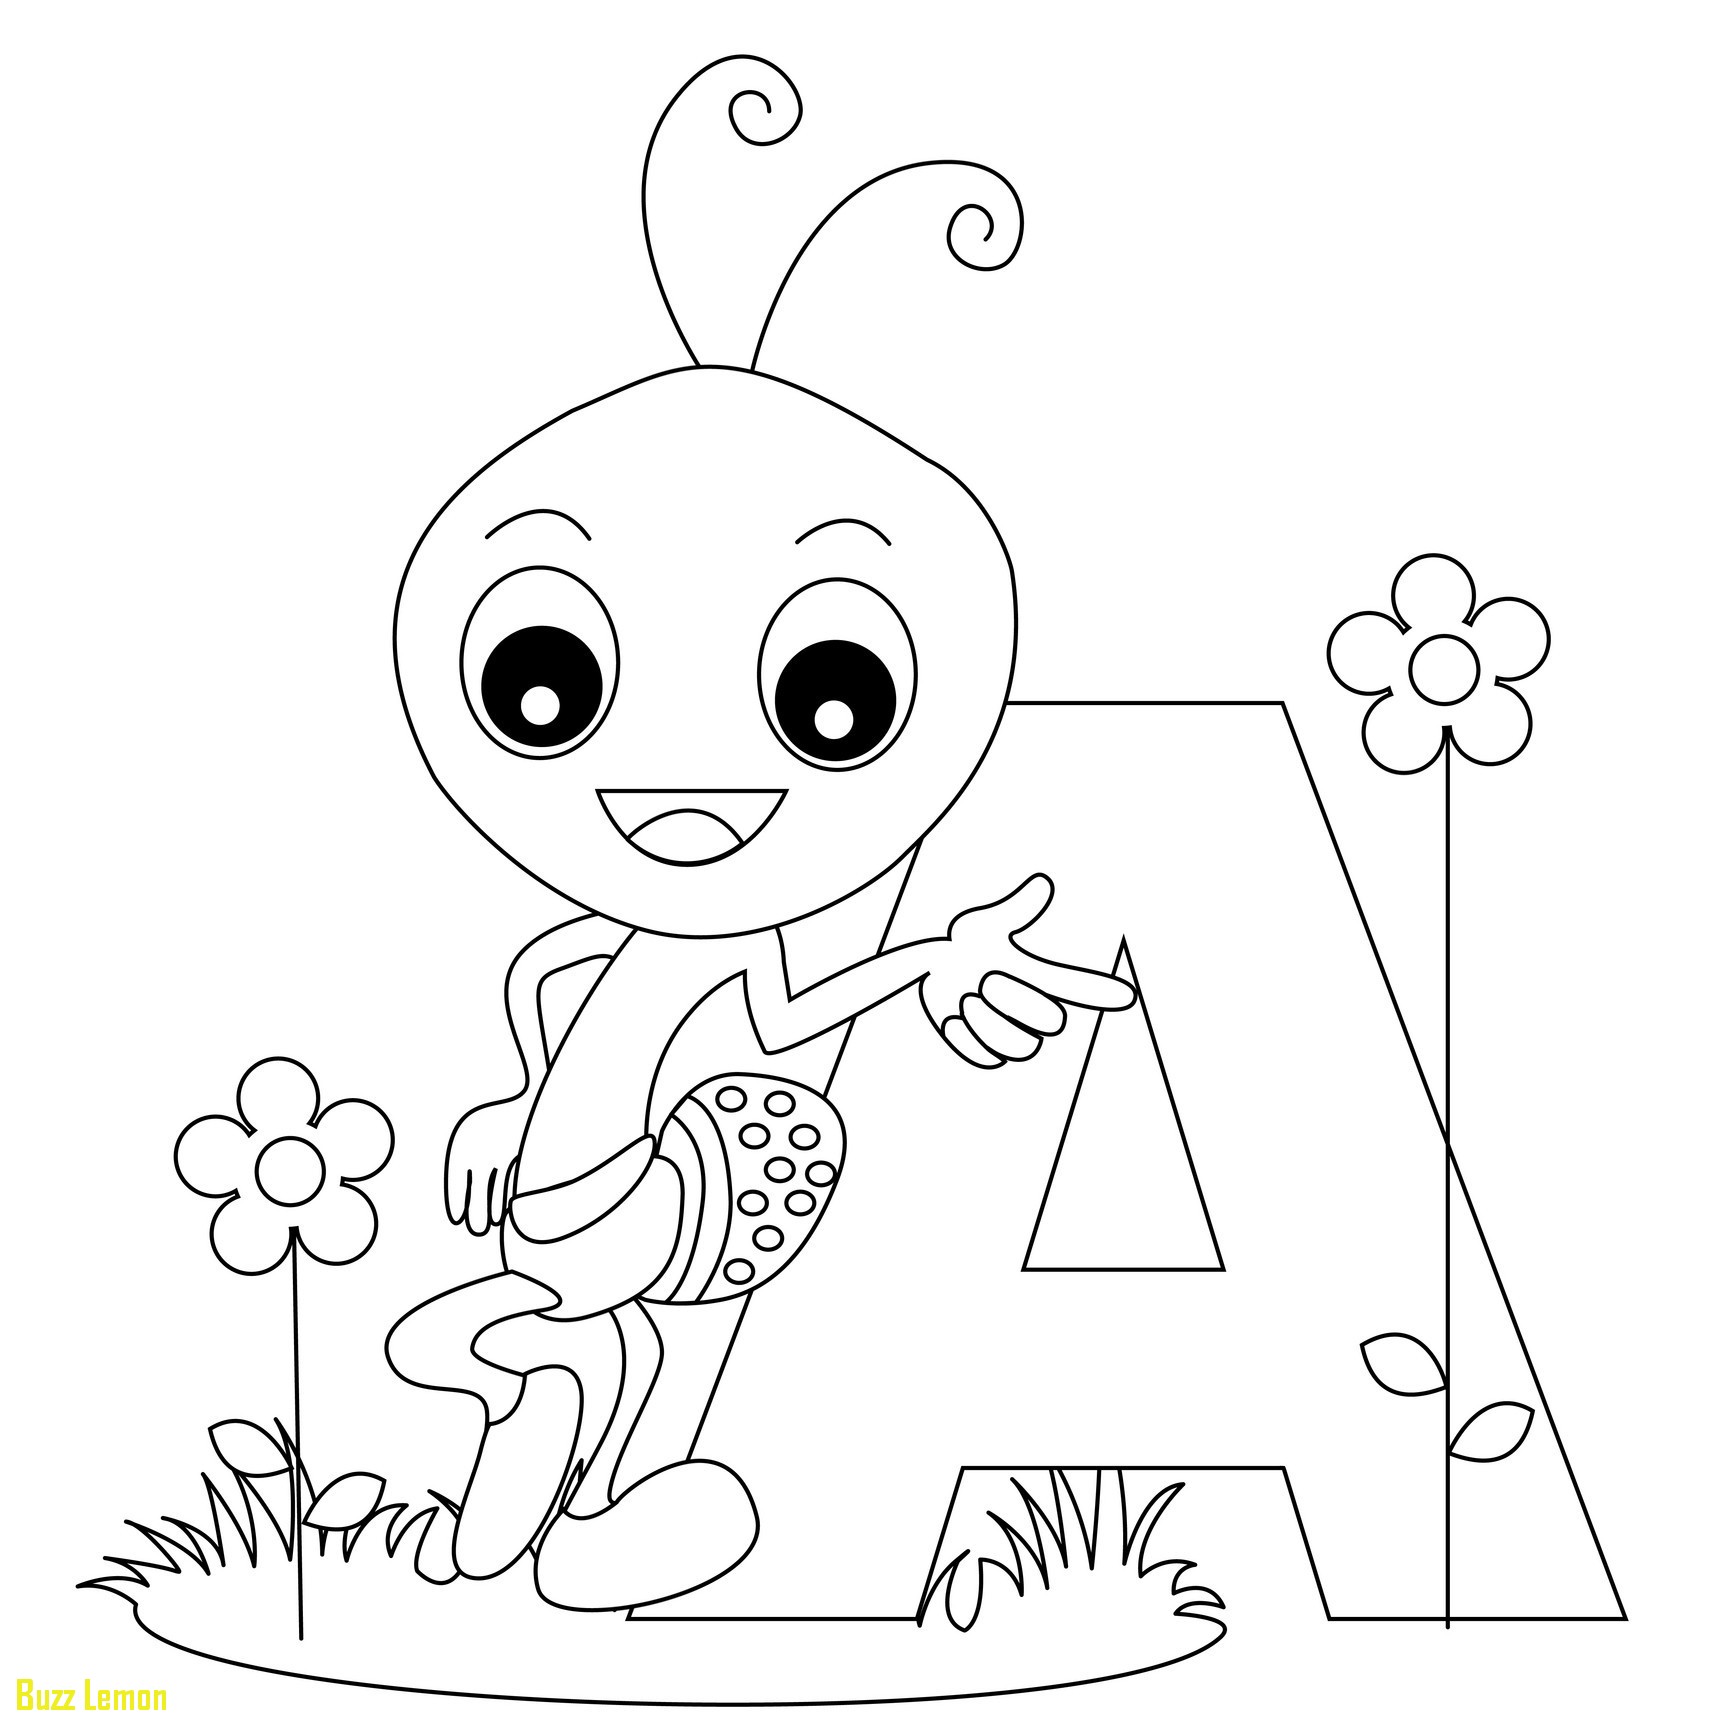 Coloring Pages Worksheets At GetColorings Free Printable Colorings Pages To Print And Color